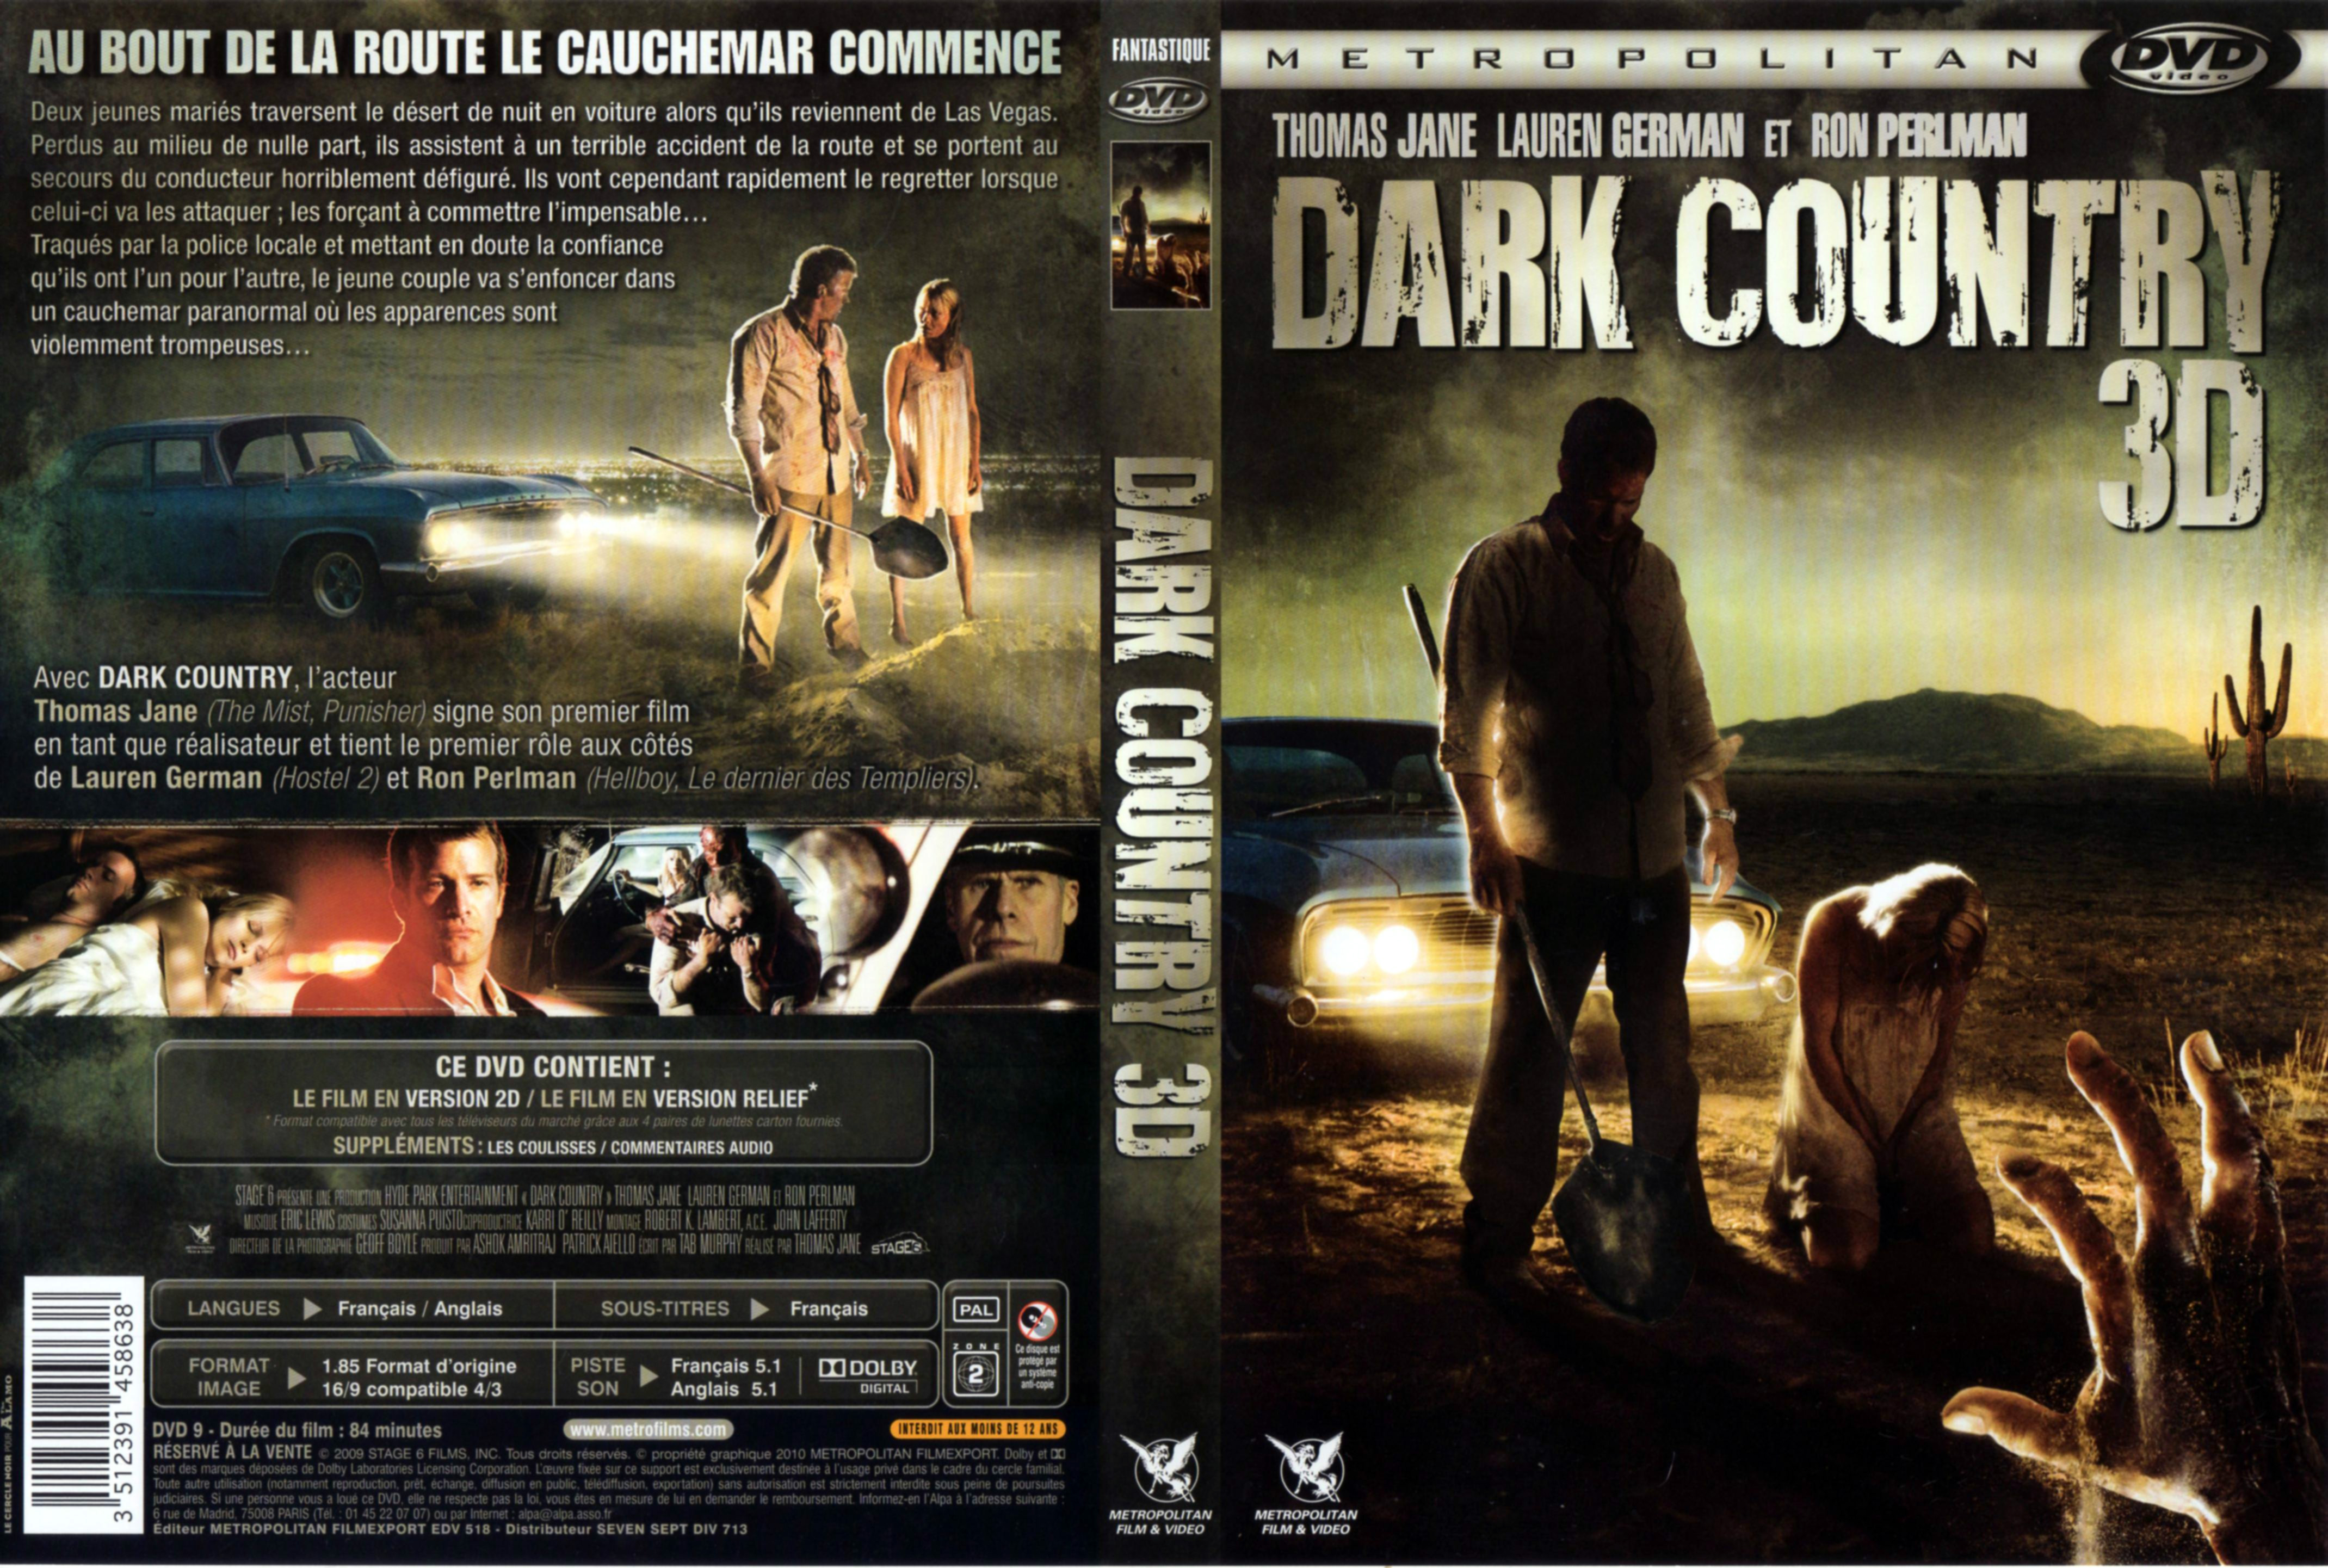 Jaquette DVD Dark country 3D